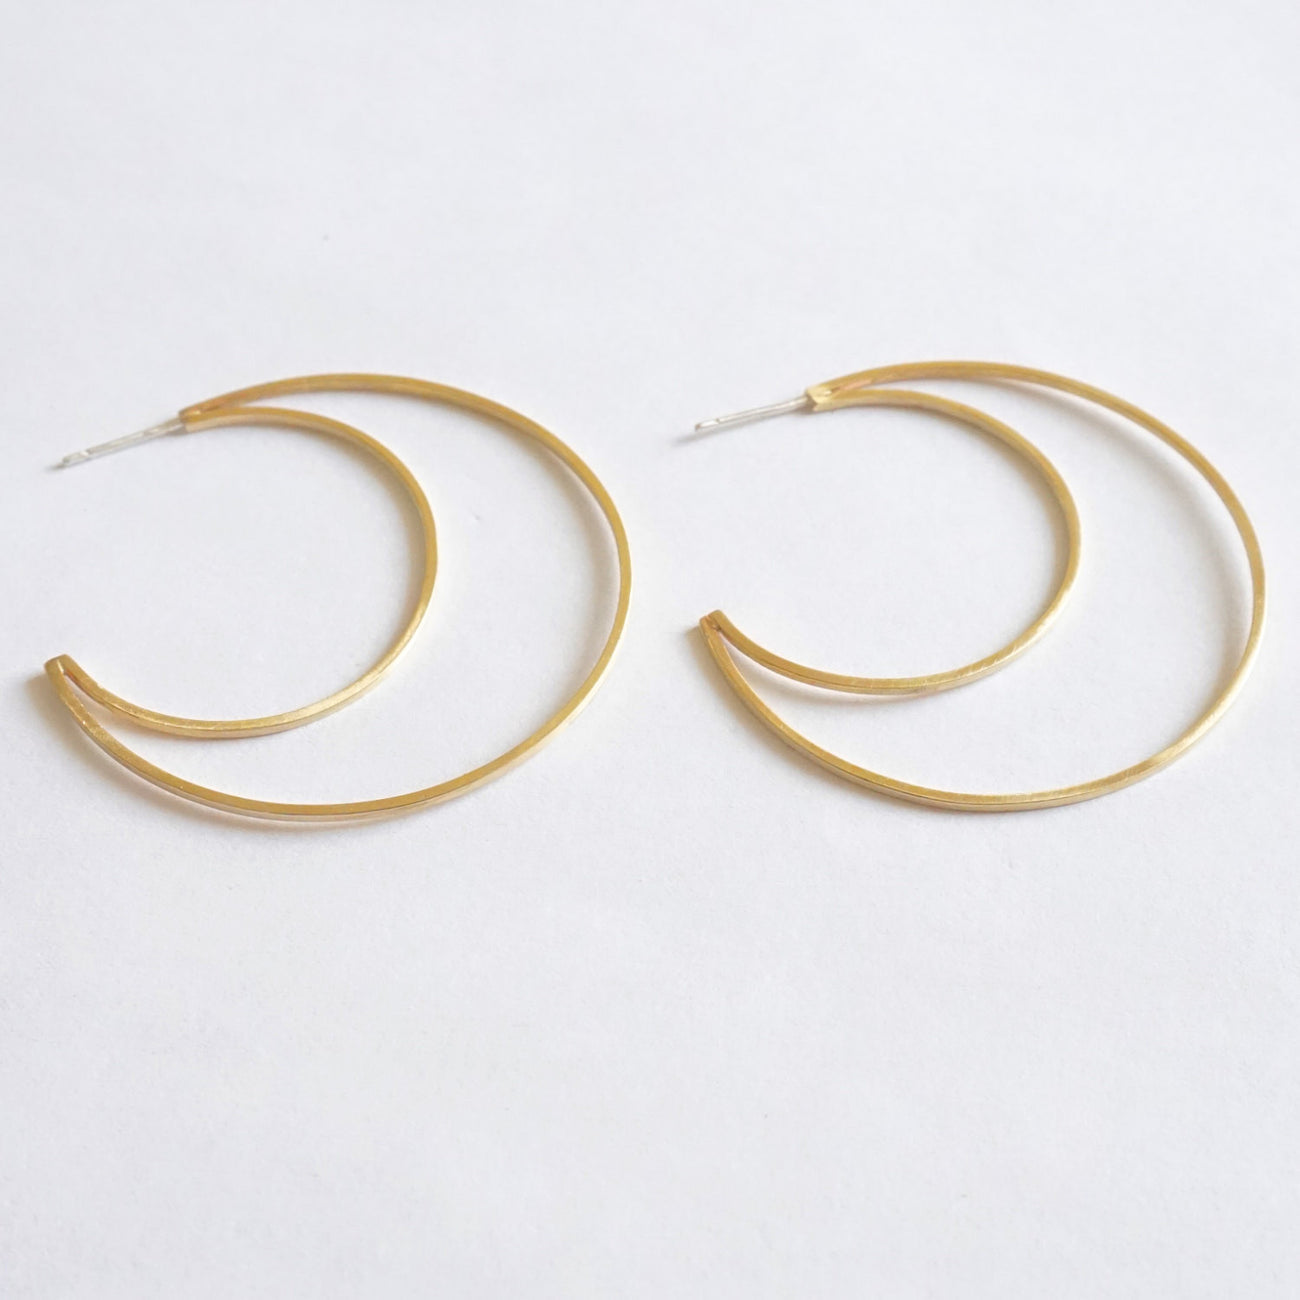 Contemporary, Hand-Crafted, Open Flat Crescent Hoop Earrings With Brushed Finish - 0261 - Virginia Wynne Designs